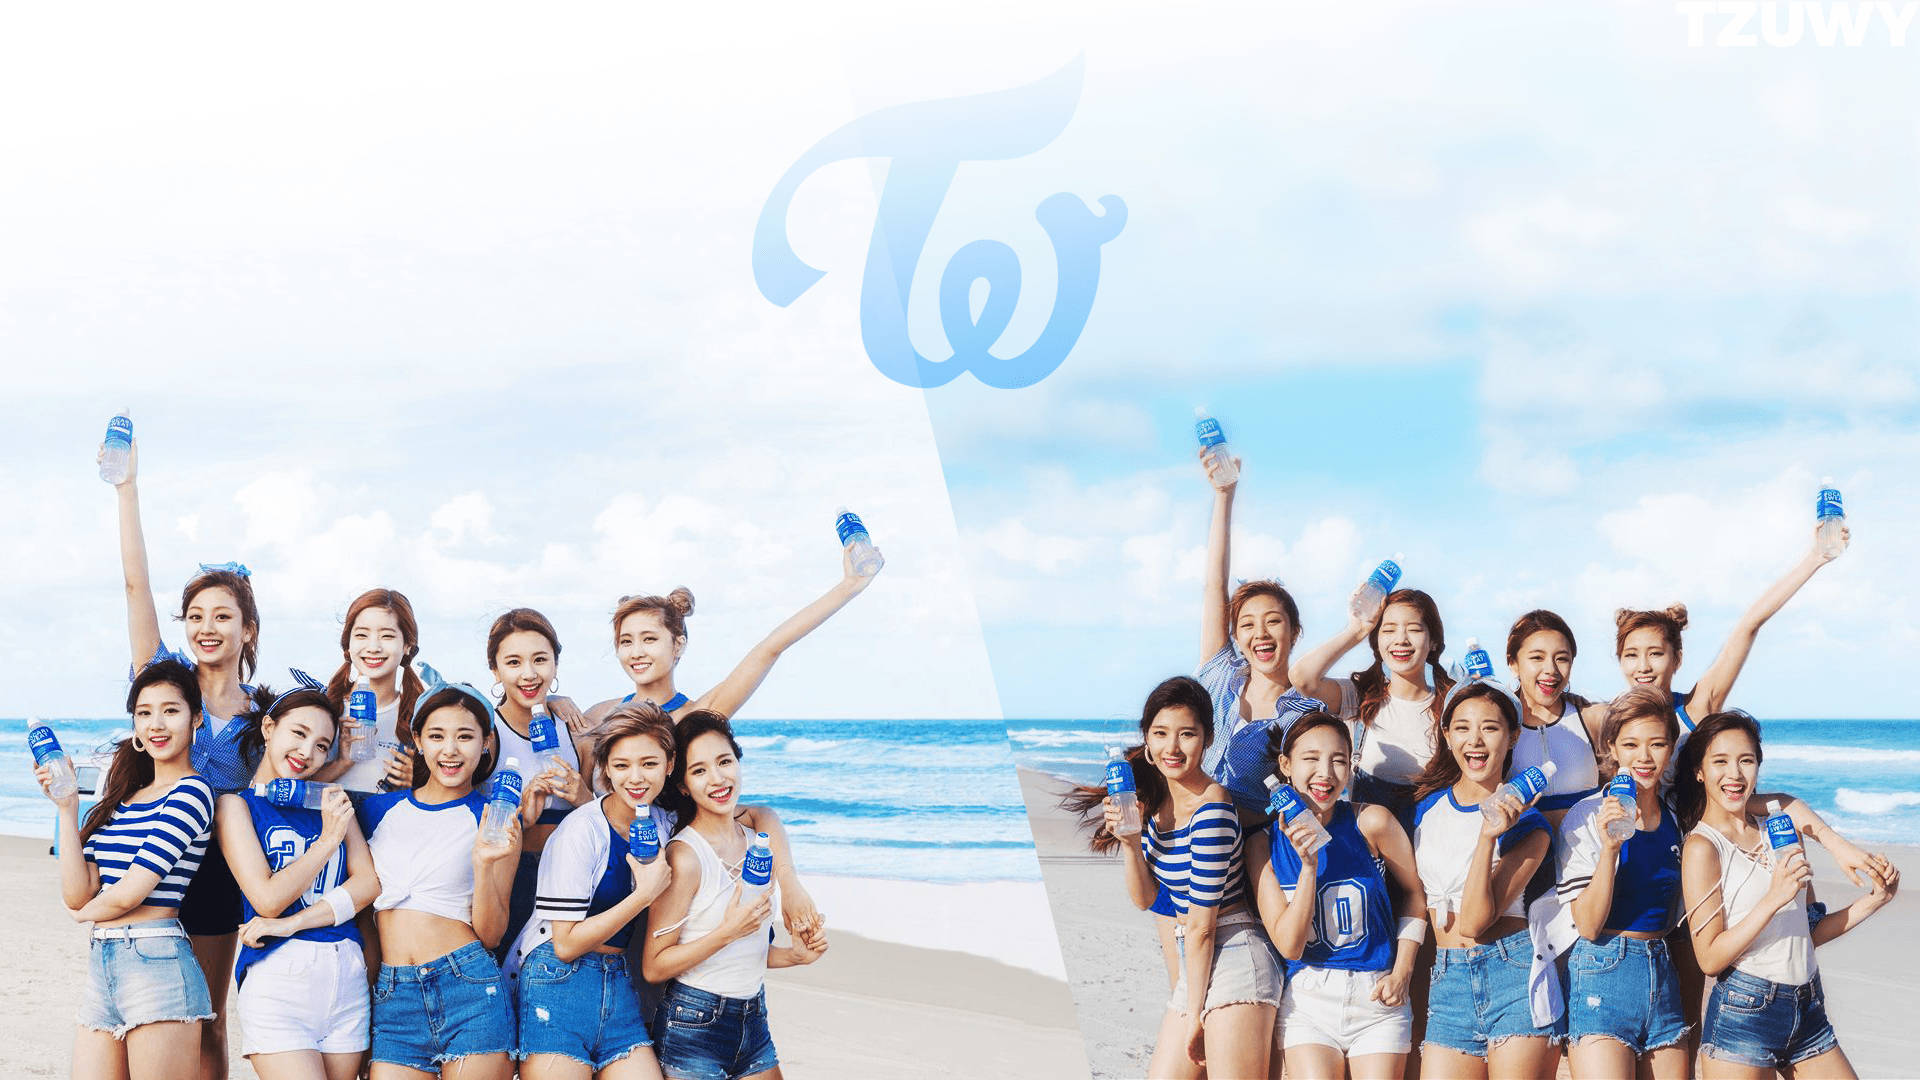 TWICE dancing to the rhythm of their hit song "I CAN'T STOP ME" for the Pocari beverage commercial Wallpaper